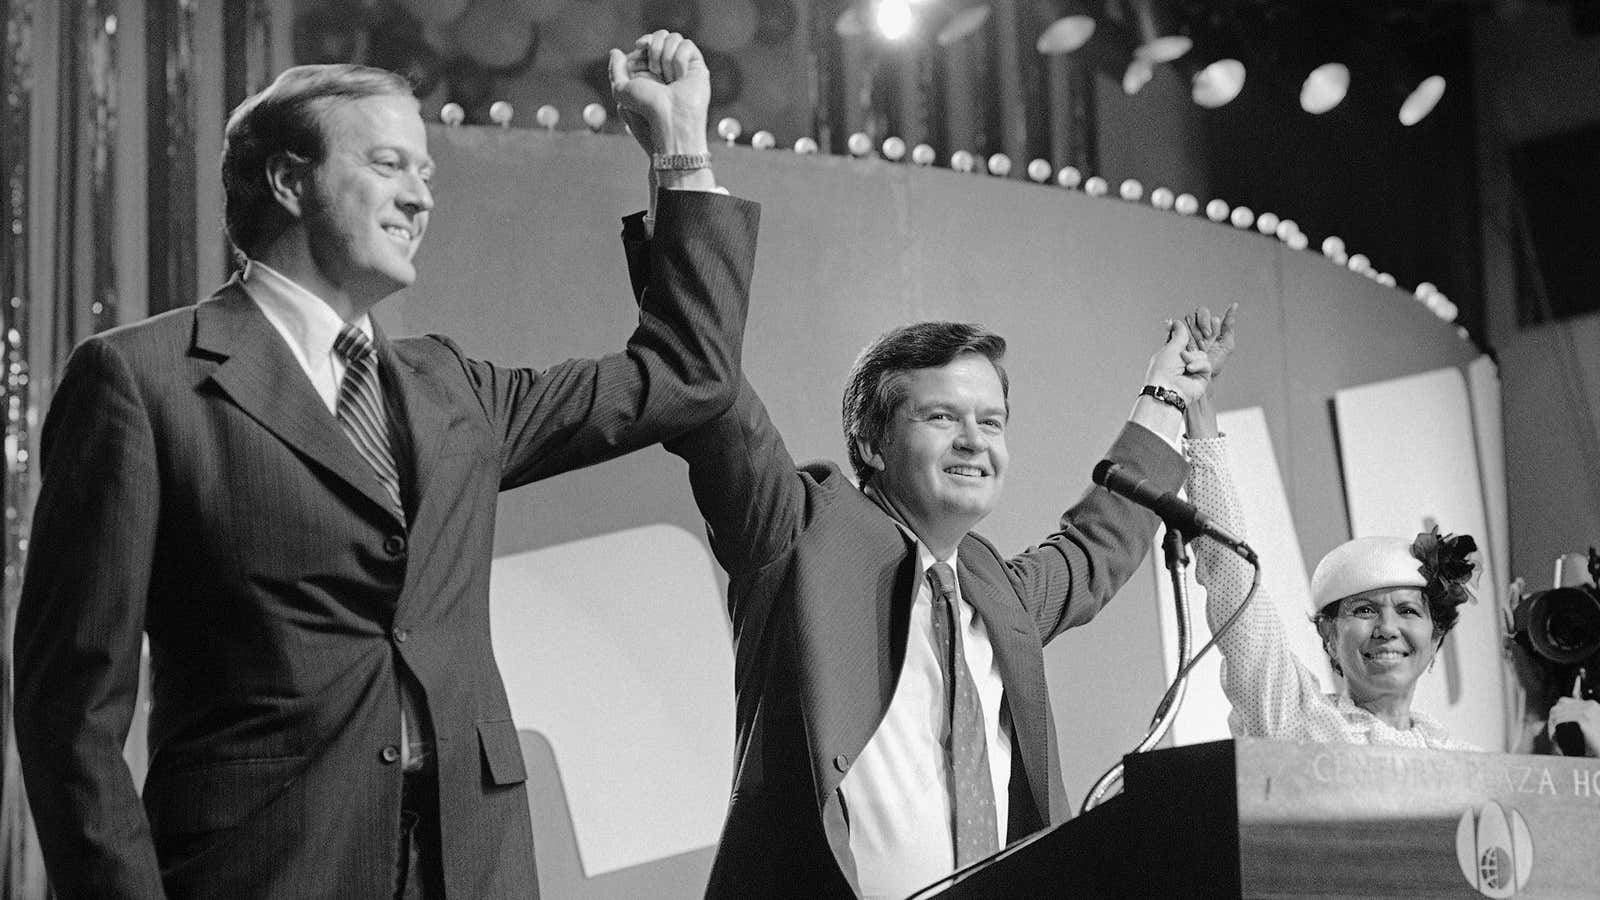 David Koch, left, running for vice president on the libertarian ticket in 1980.